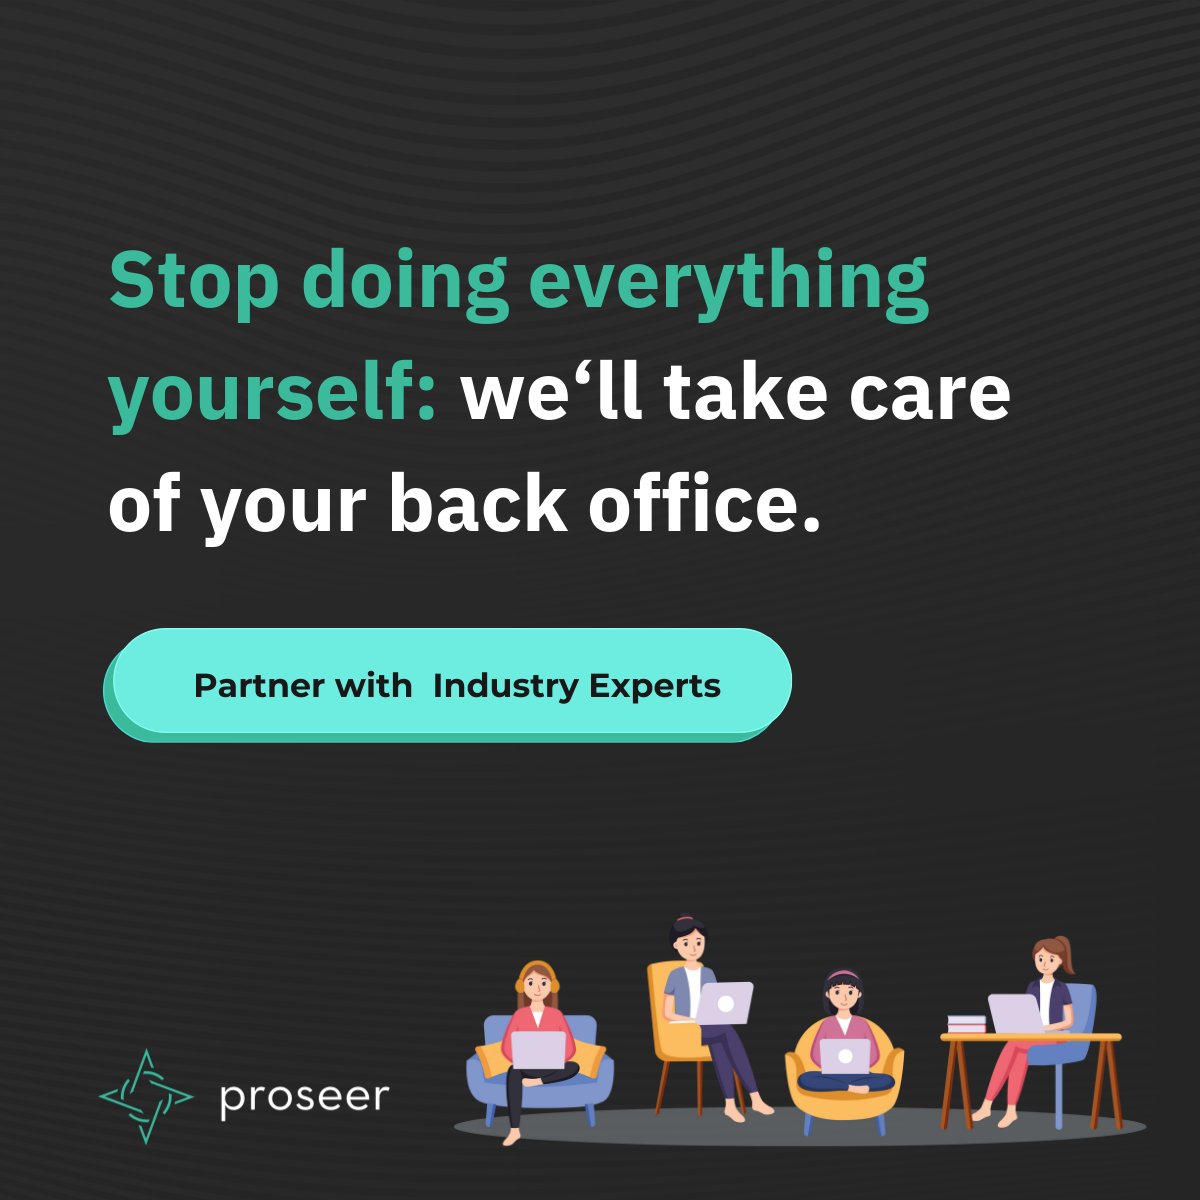 Quit trying to manage it all on your own. Our team of industry experts is ready to handle your back-office tasks, so you can concentrate on growing your business. Partner with us today. #BackOfficeSupport #IndustryExperts

Connect with our team today!
tinyurl.com/4f4ru9sj